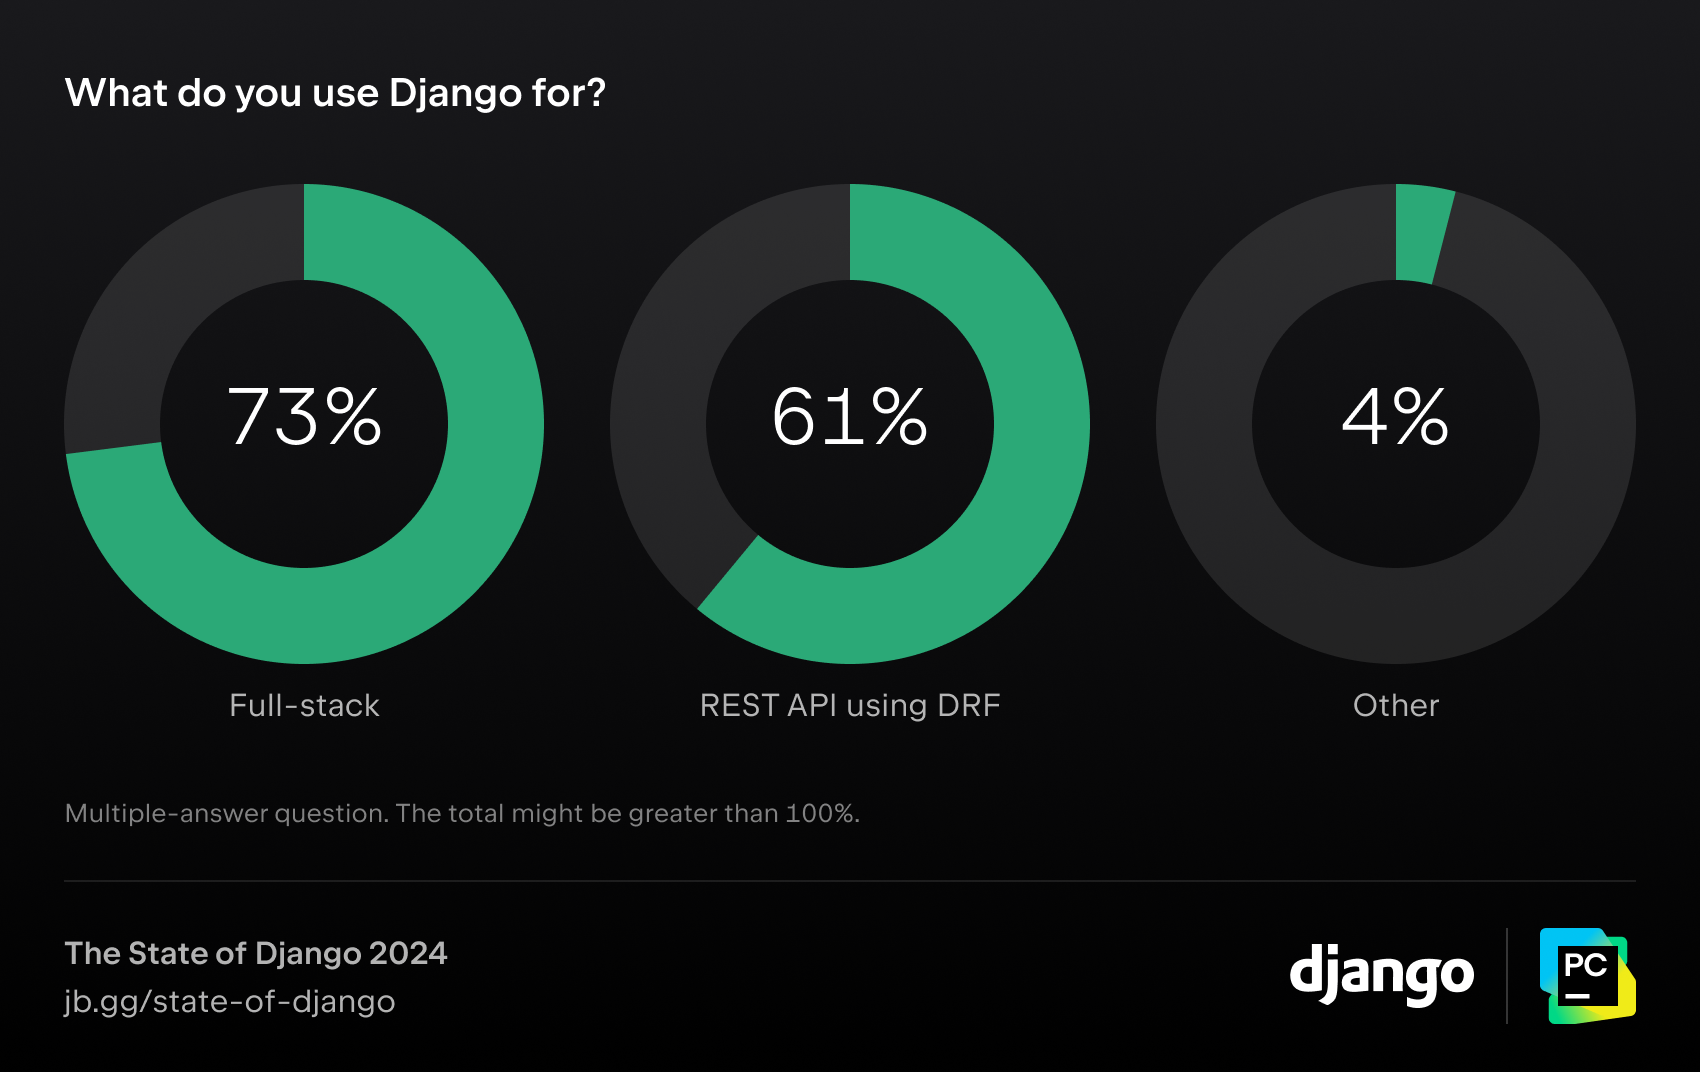 What do you use Django for (full-stack or REST API)?